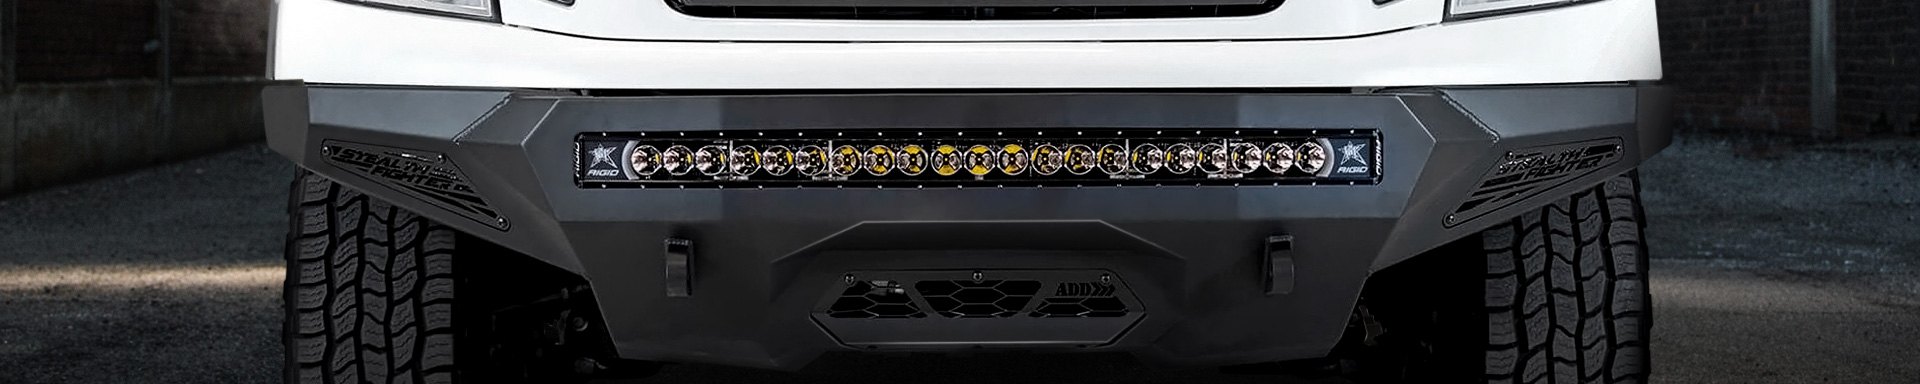 Transform The Exterior Of Your Titan With New Line Of ADD HD Bumpers